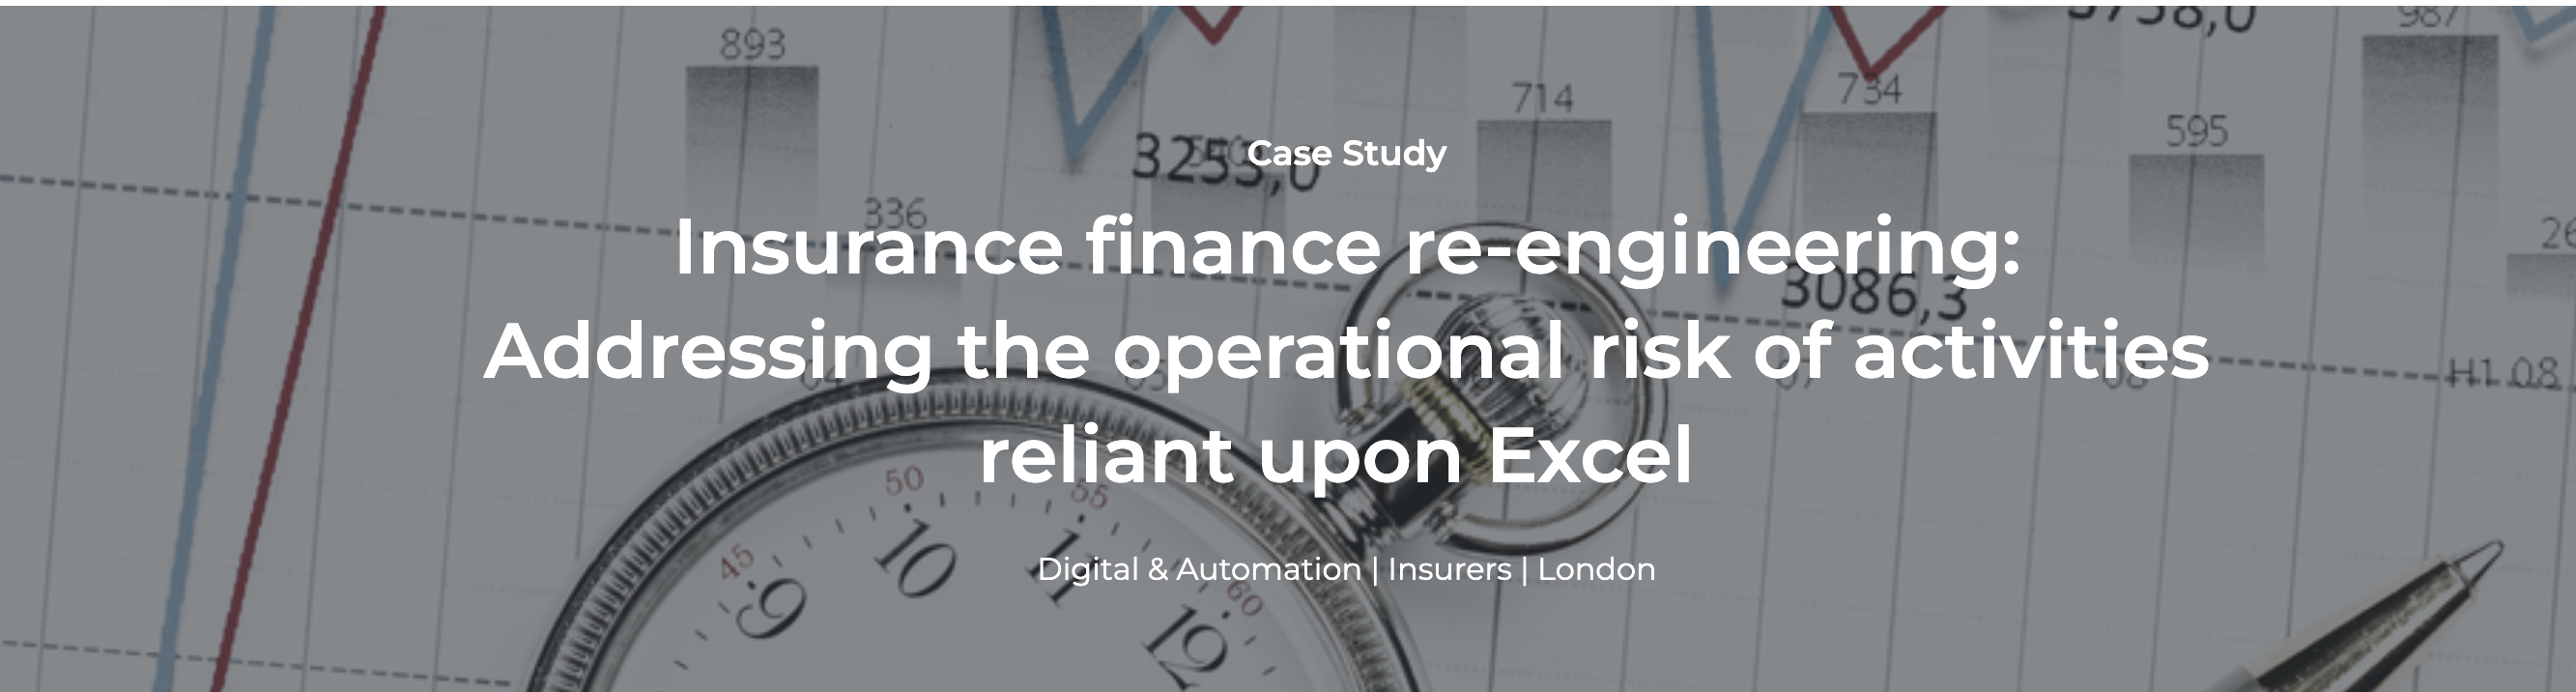 Digital Case Study: Operational risk of activities reliant upon Excel